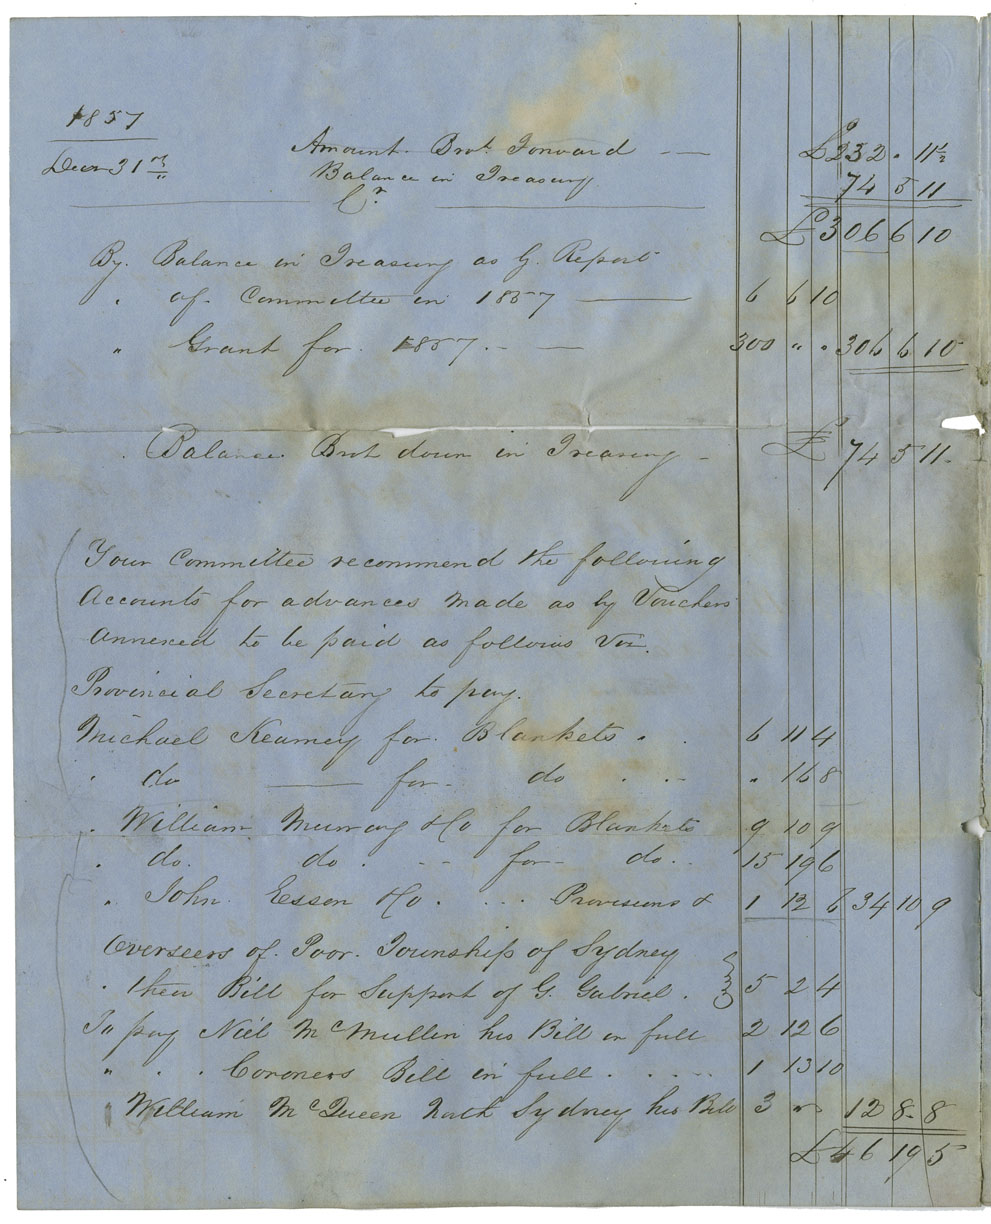 Report of a Committee on Indian Affairs with accounts.